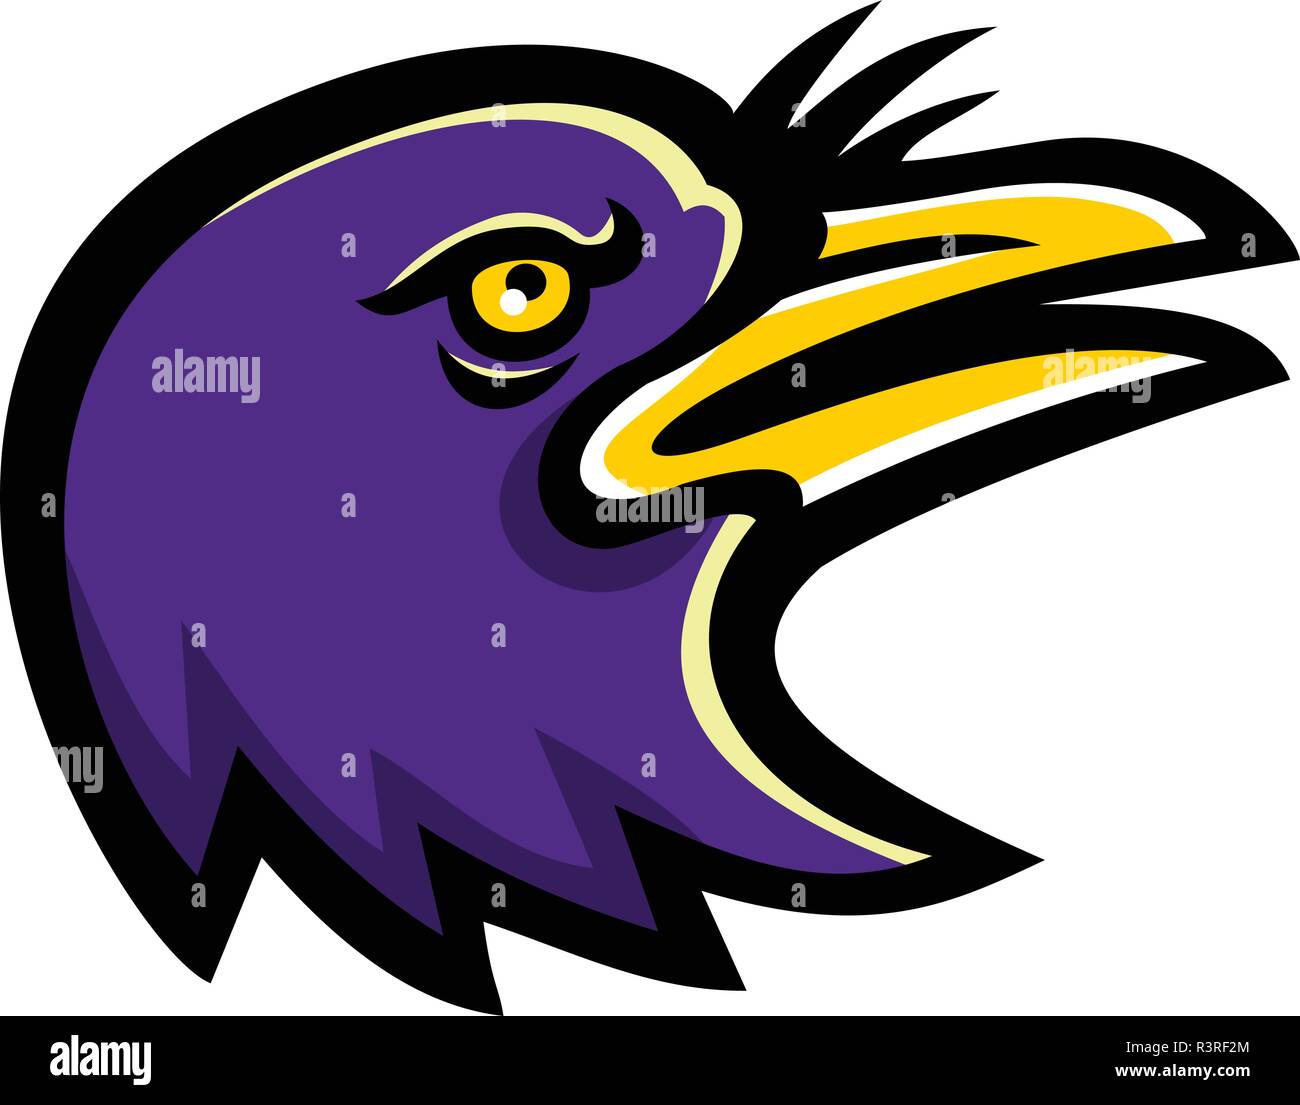 Mascot icon illustration of head of an American crow, a large passerine bird species of the family Corvidae, looking up viewed from side on isolated b Stock Vector